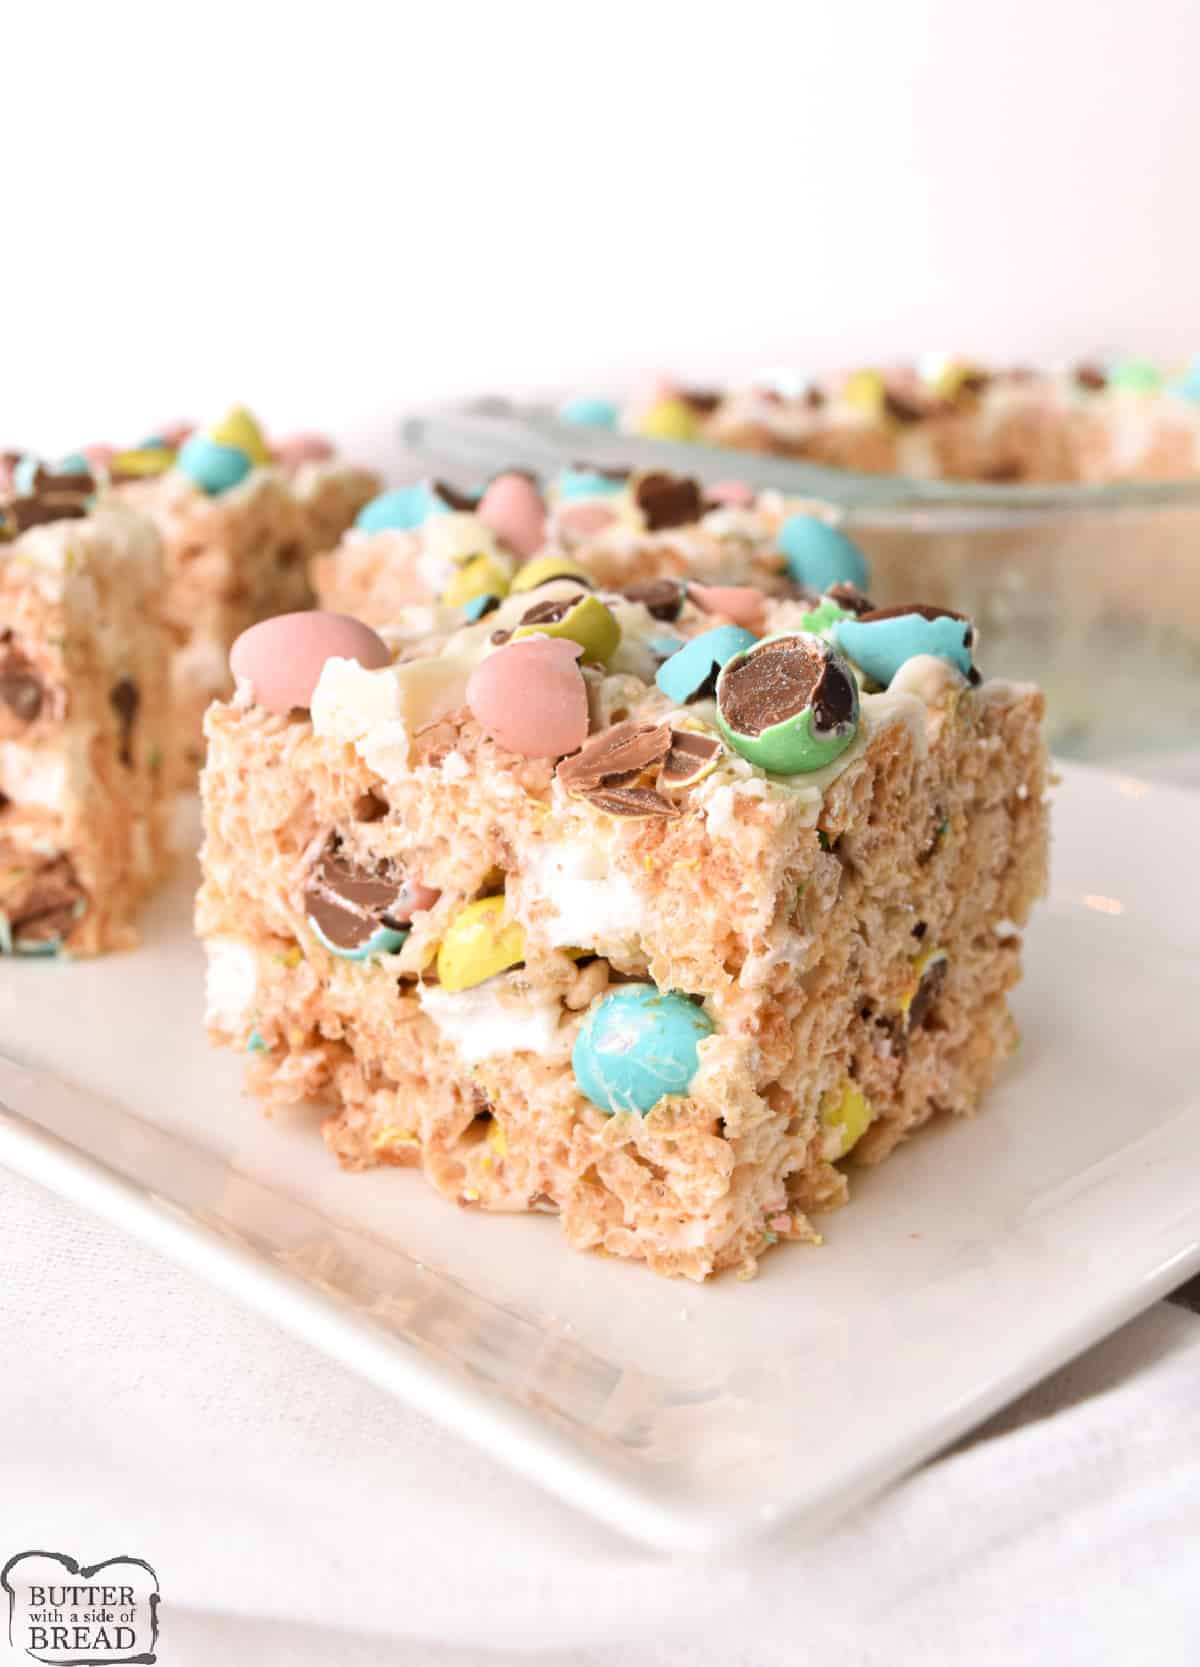 MINI EGG RICE KRISPIE TREATS - Butter with a Side of Bread